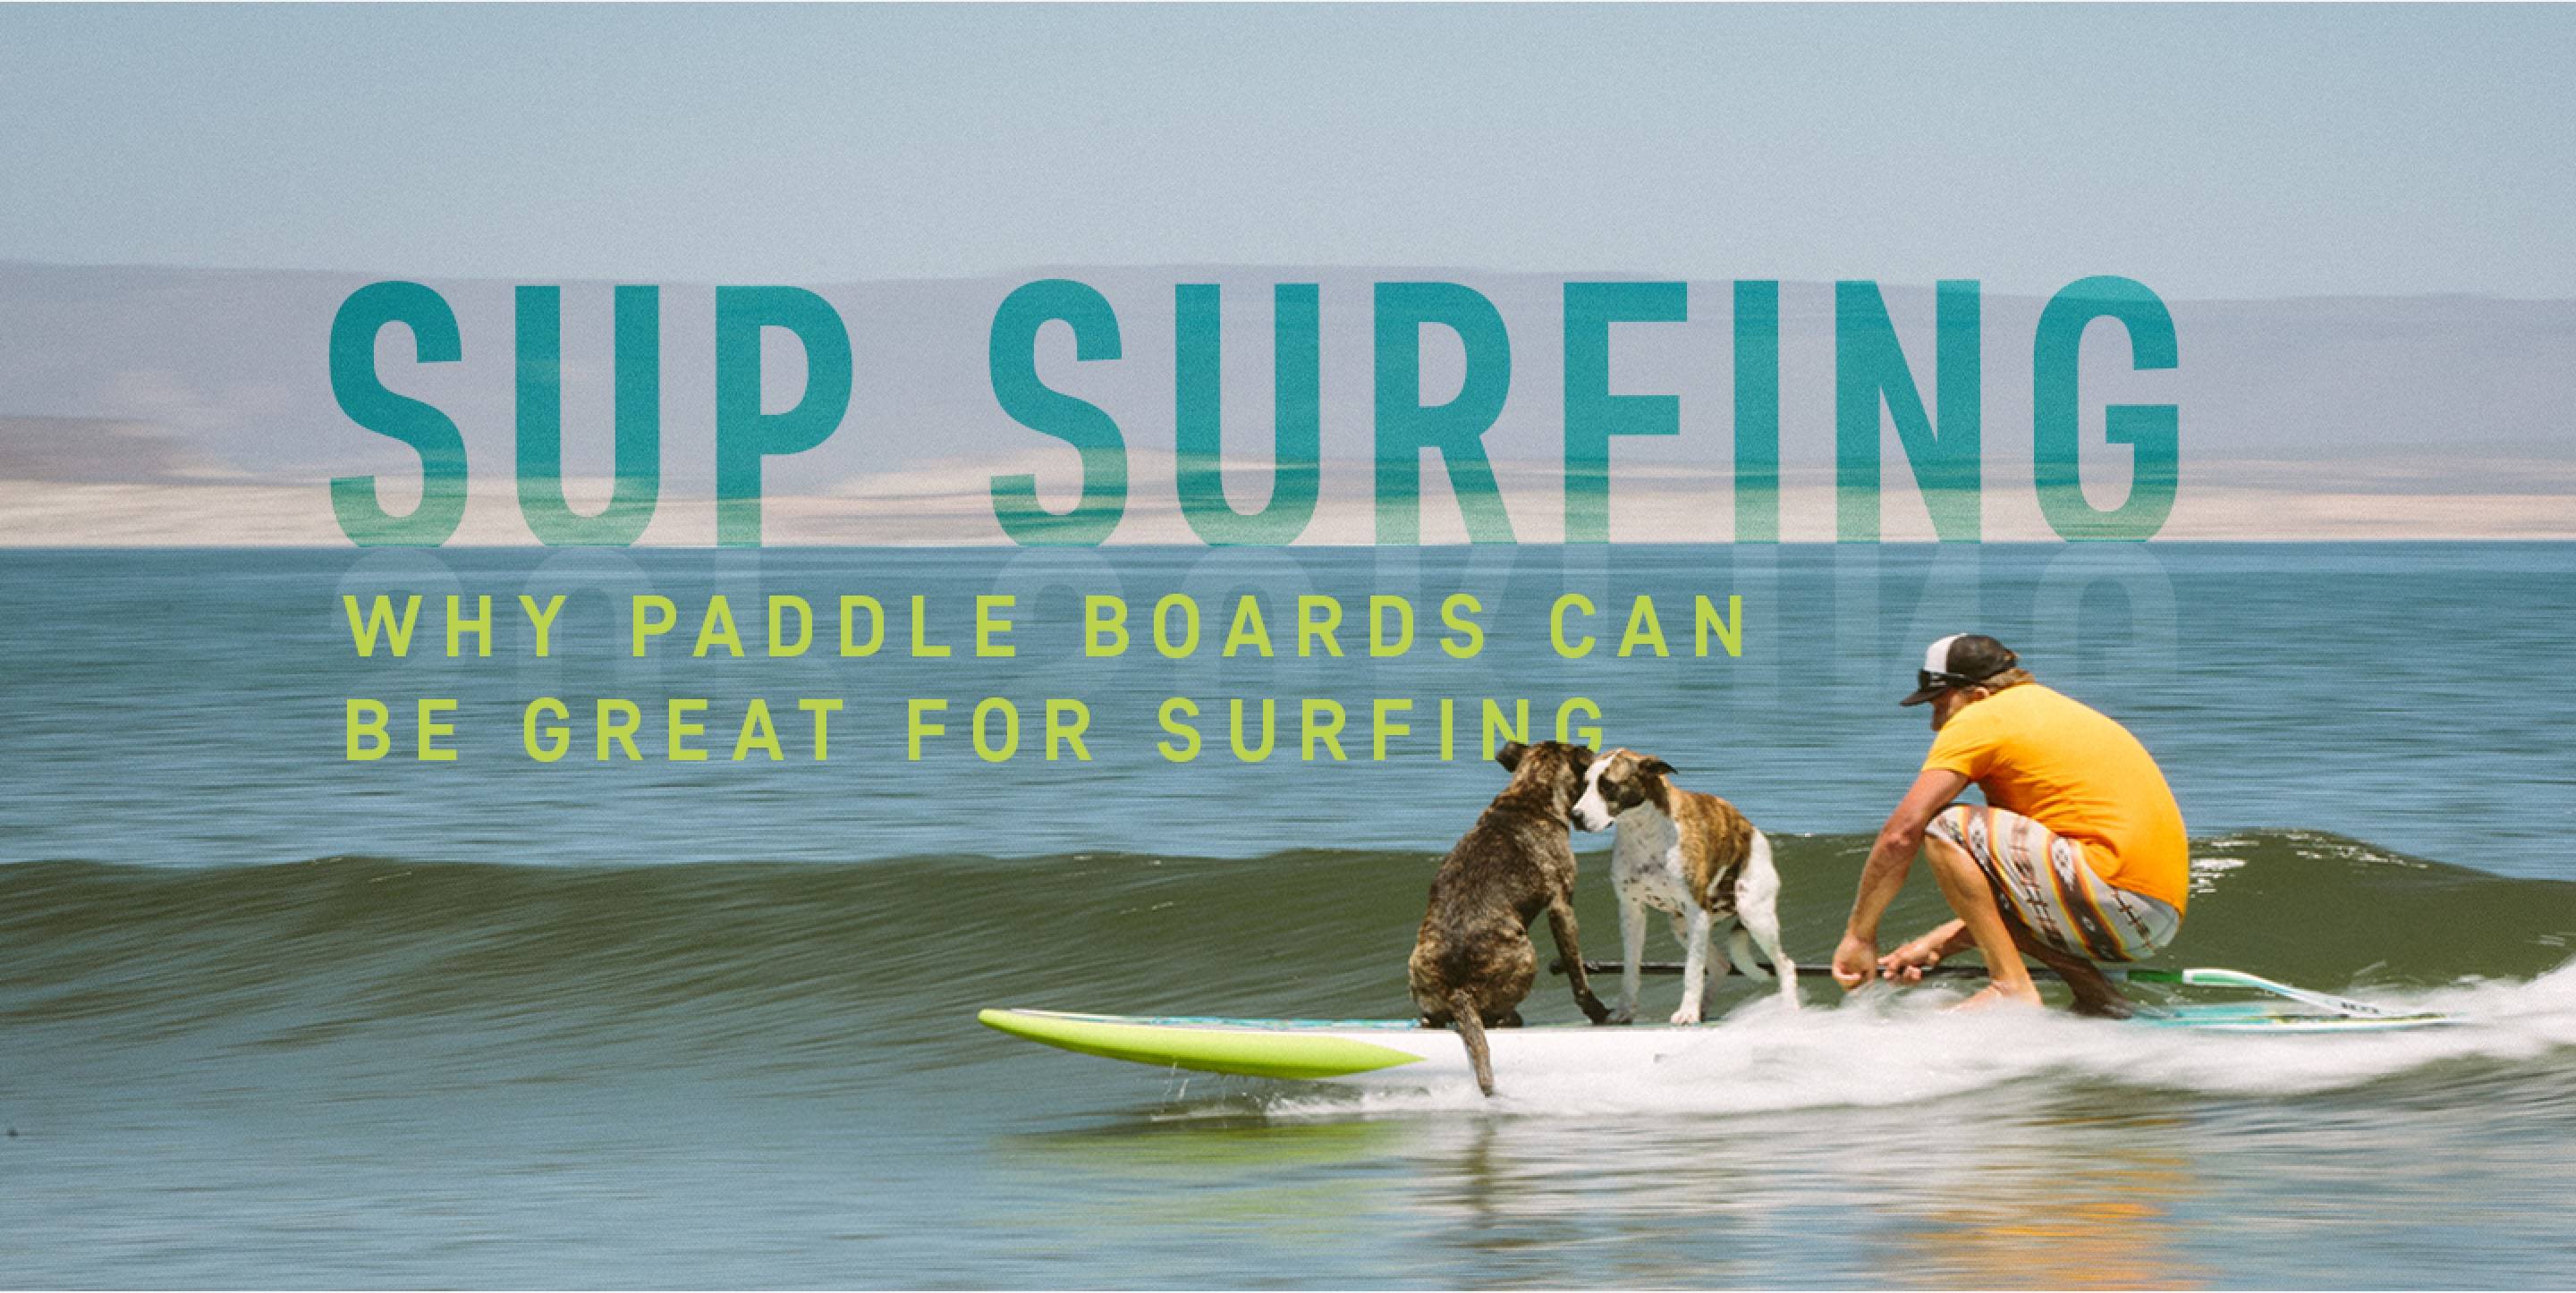 Guy SUP surfing with his dogs on the paddle board